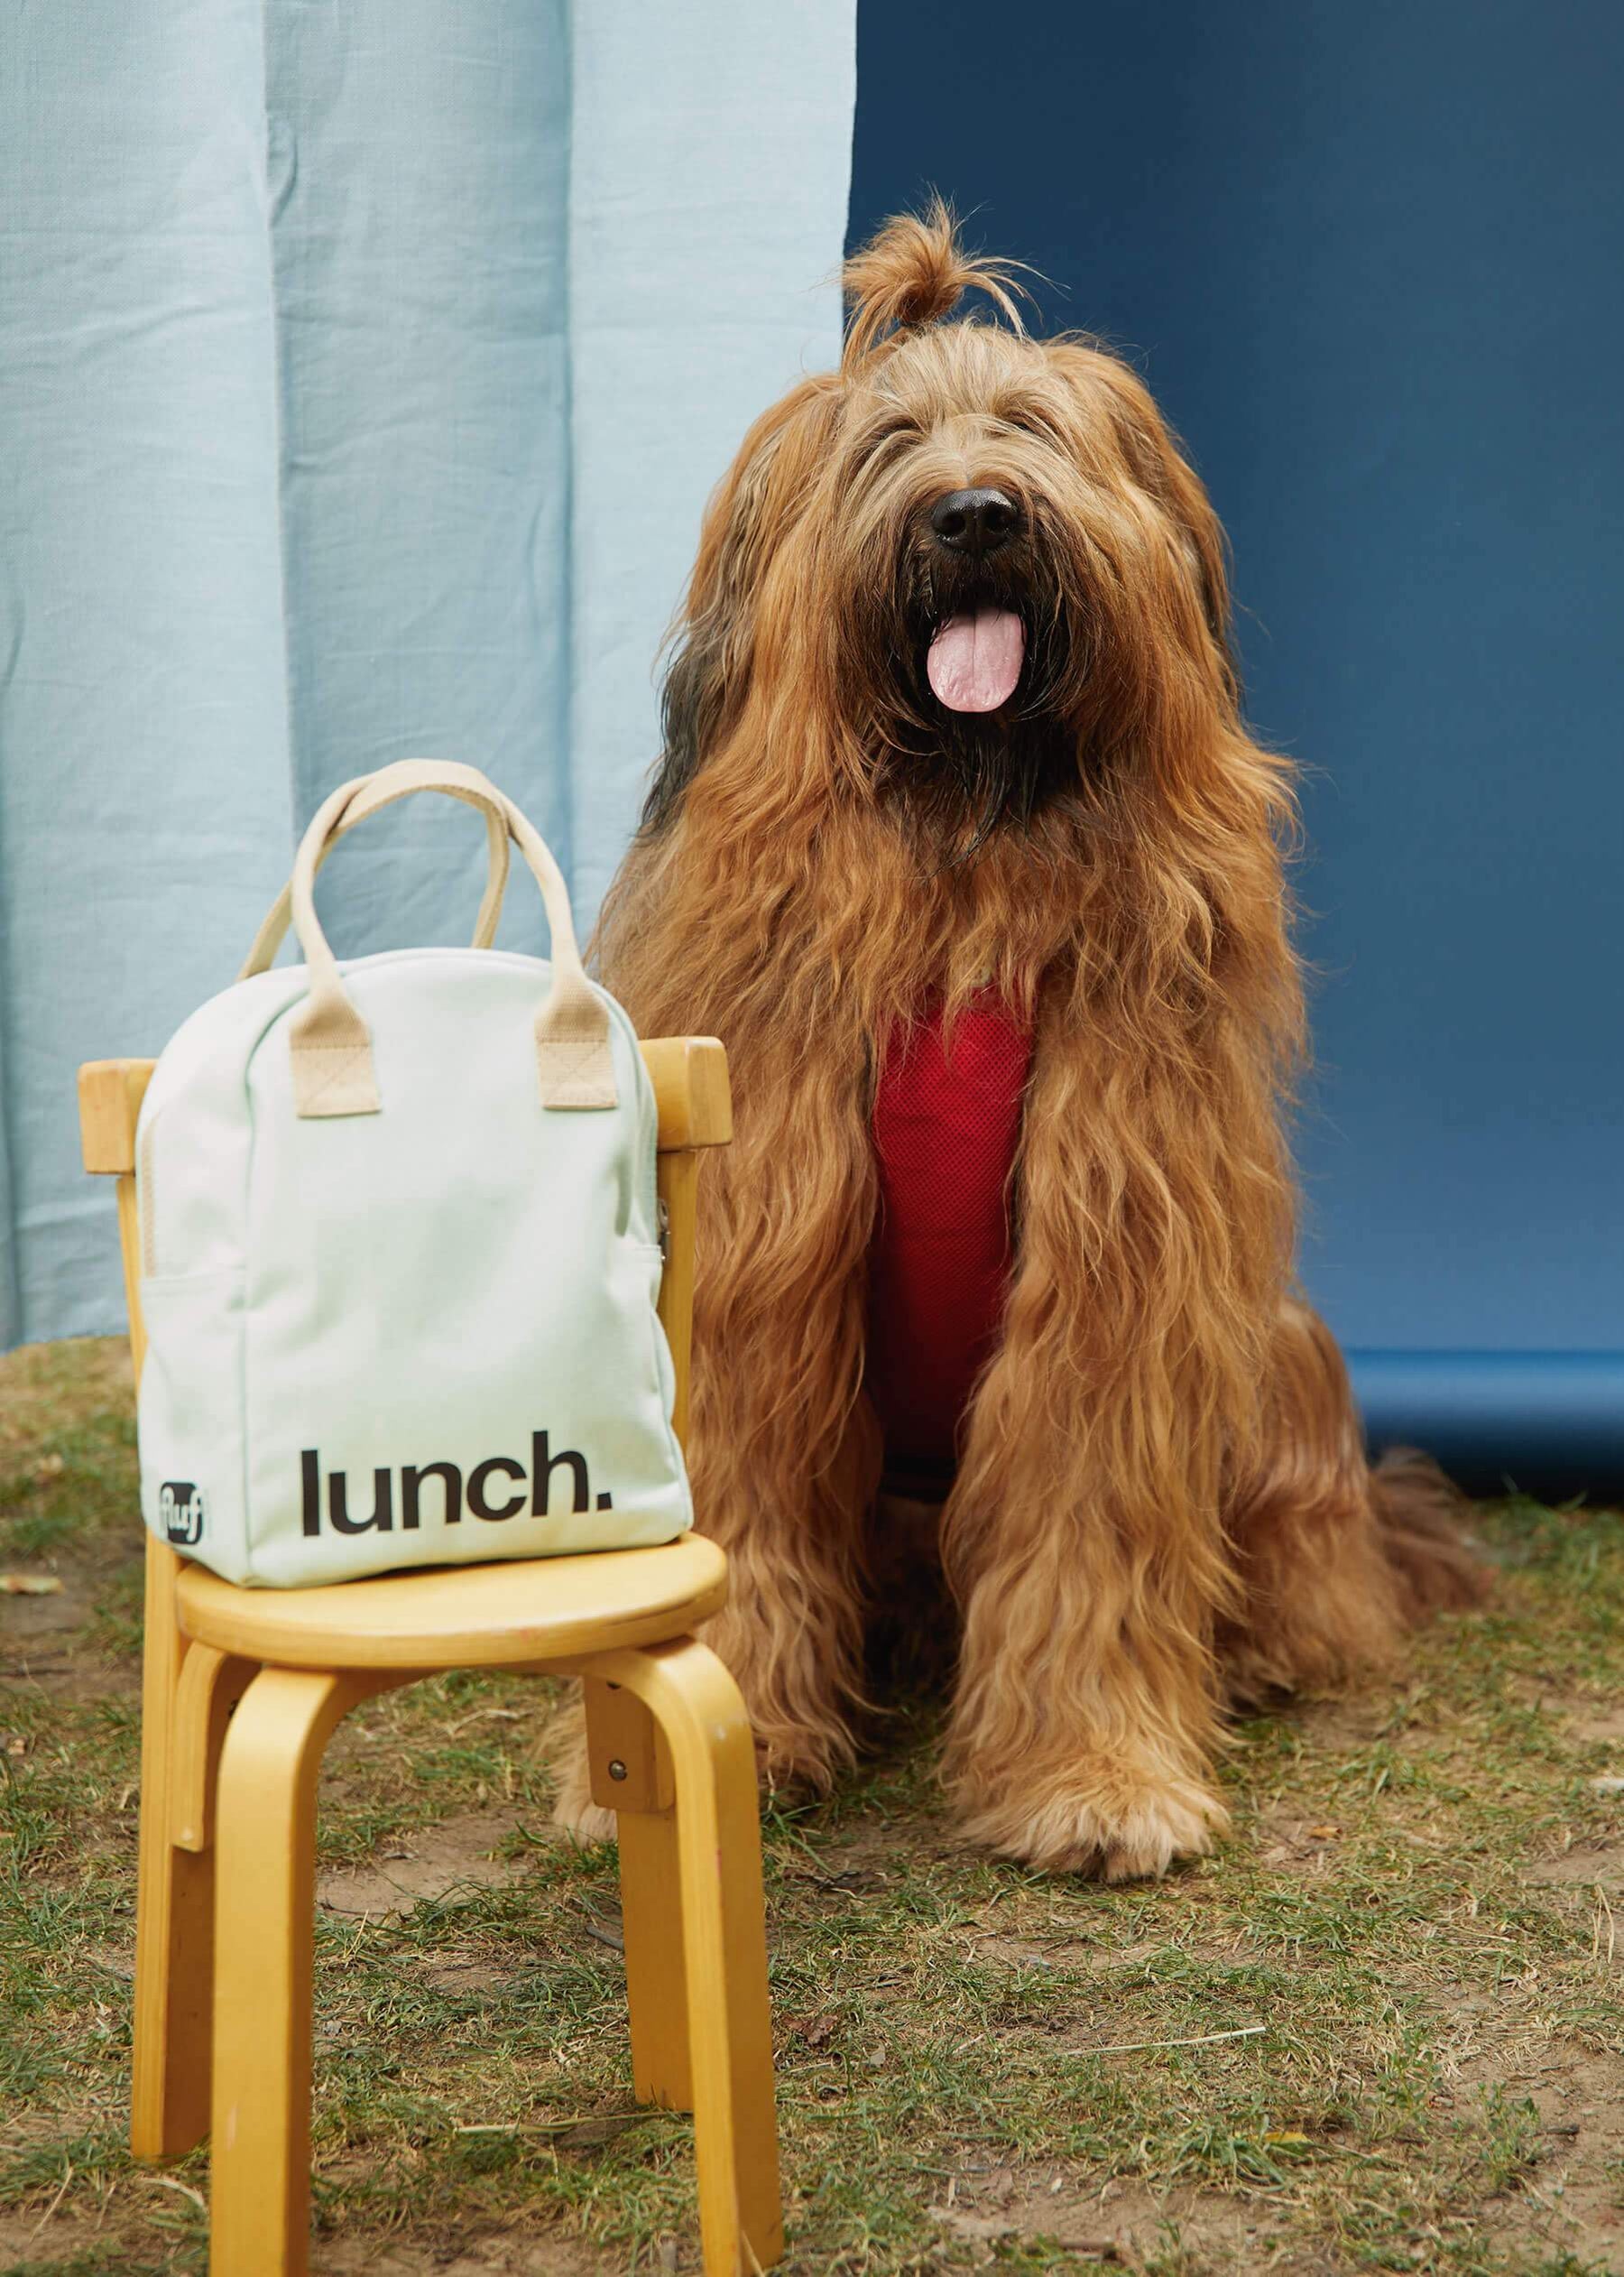 'Lunch' Mint Lunch Bag